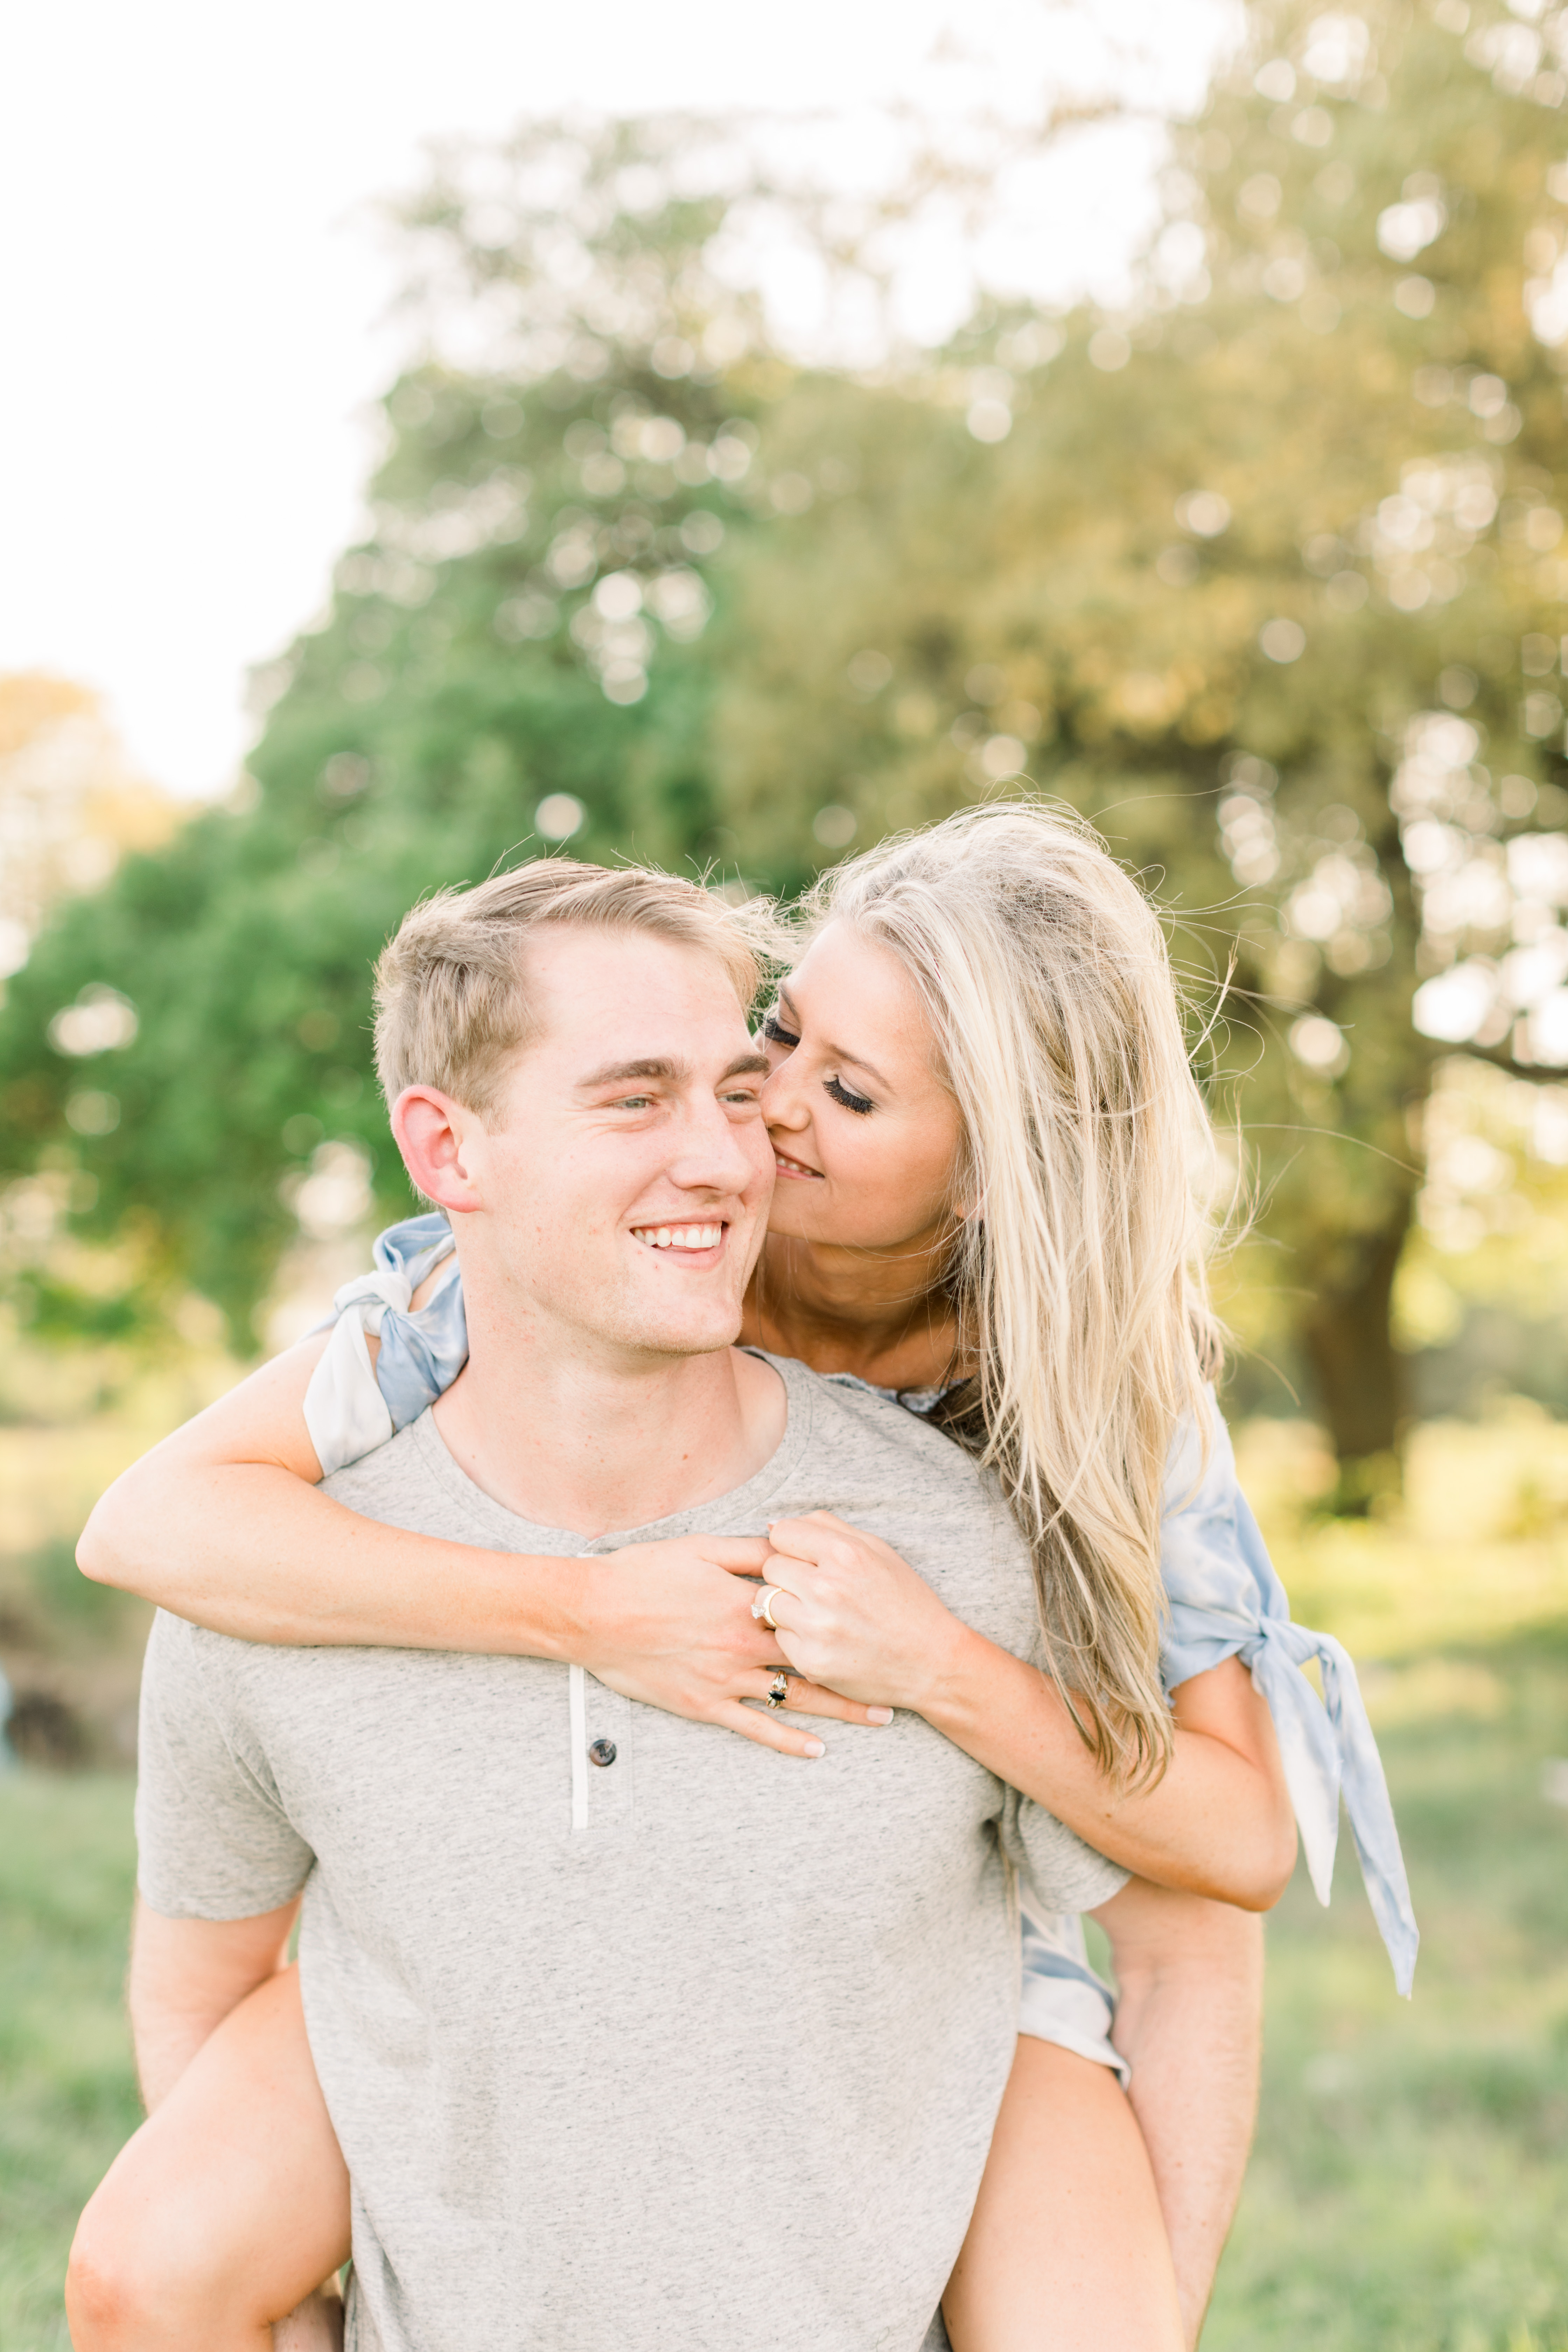 The Woodlands Engagement Session // Mitchell and Bailey